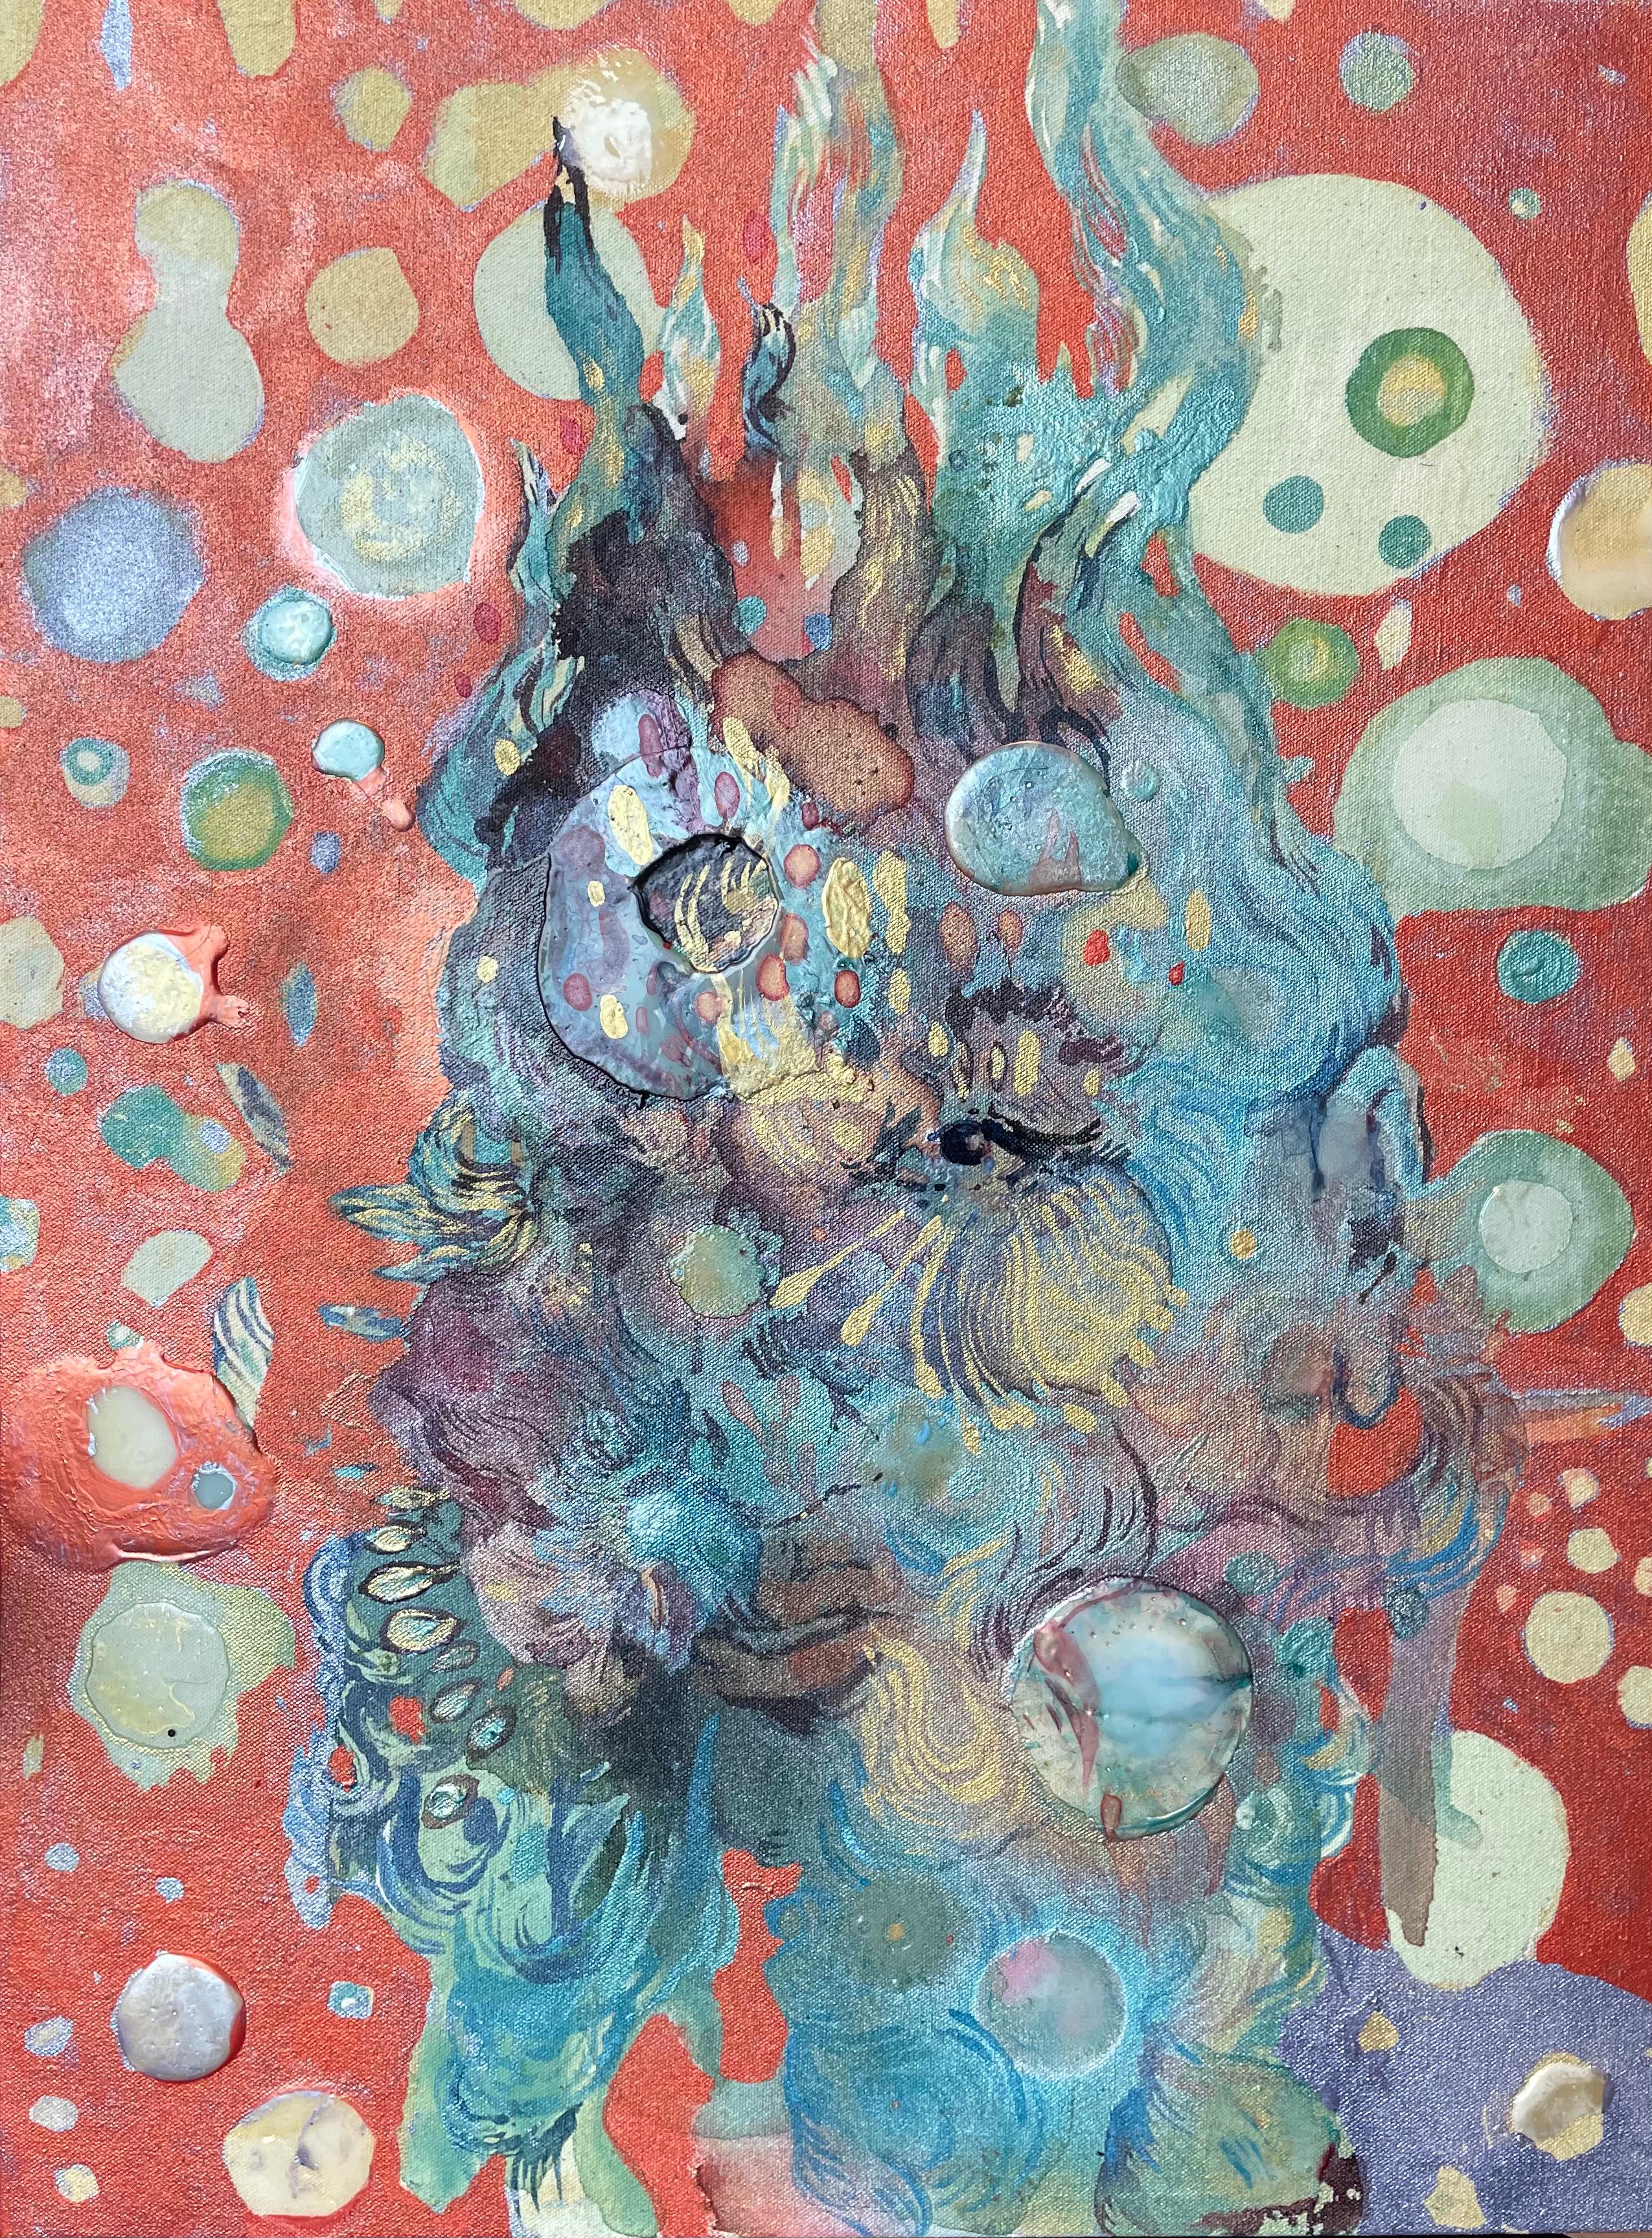 SOMETHING NEW - MOON DEW - unique gestural abstract painting 